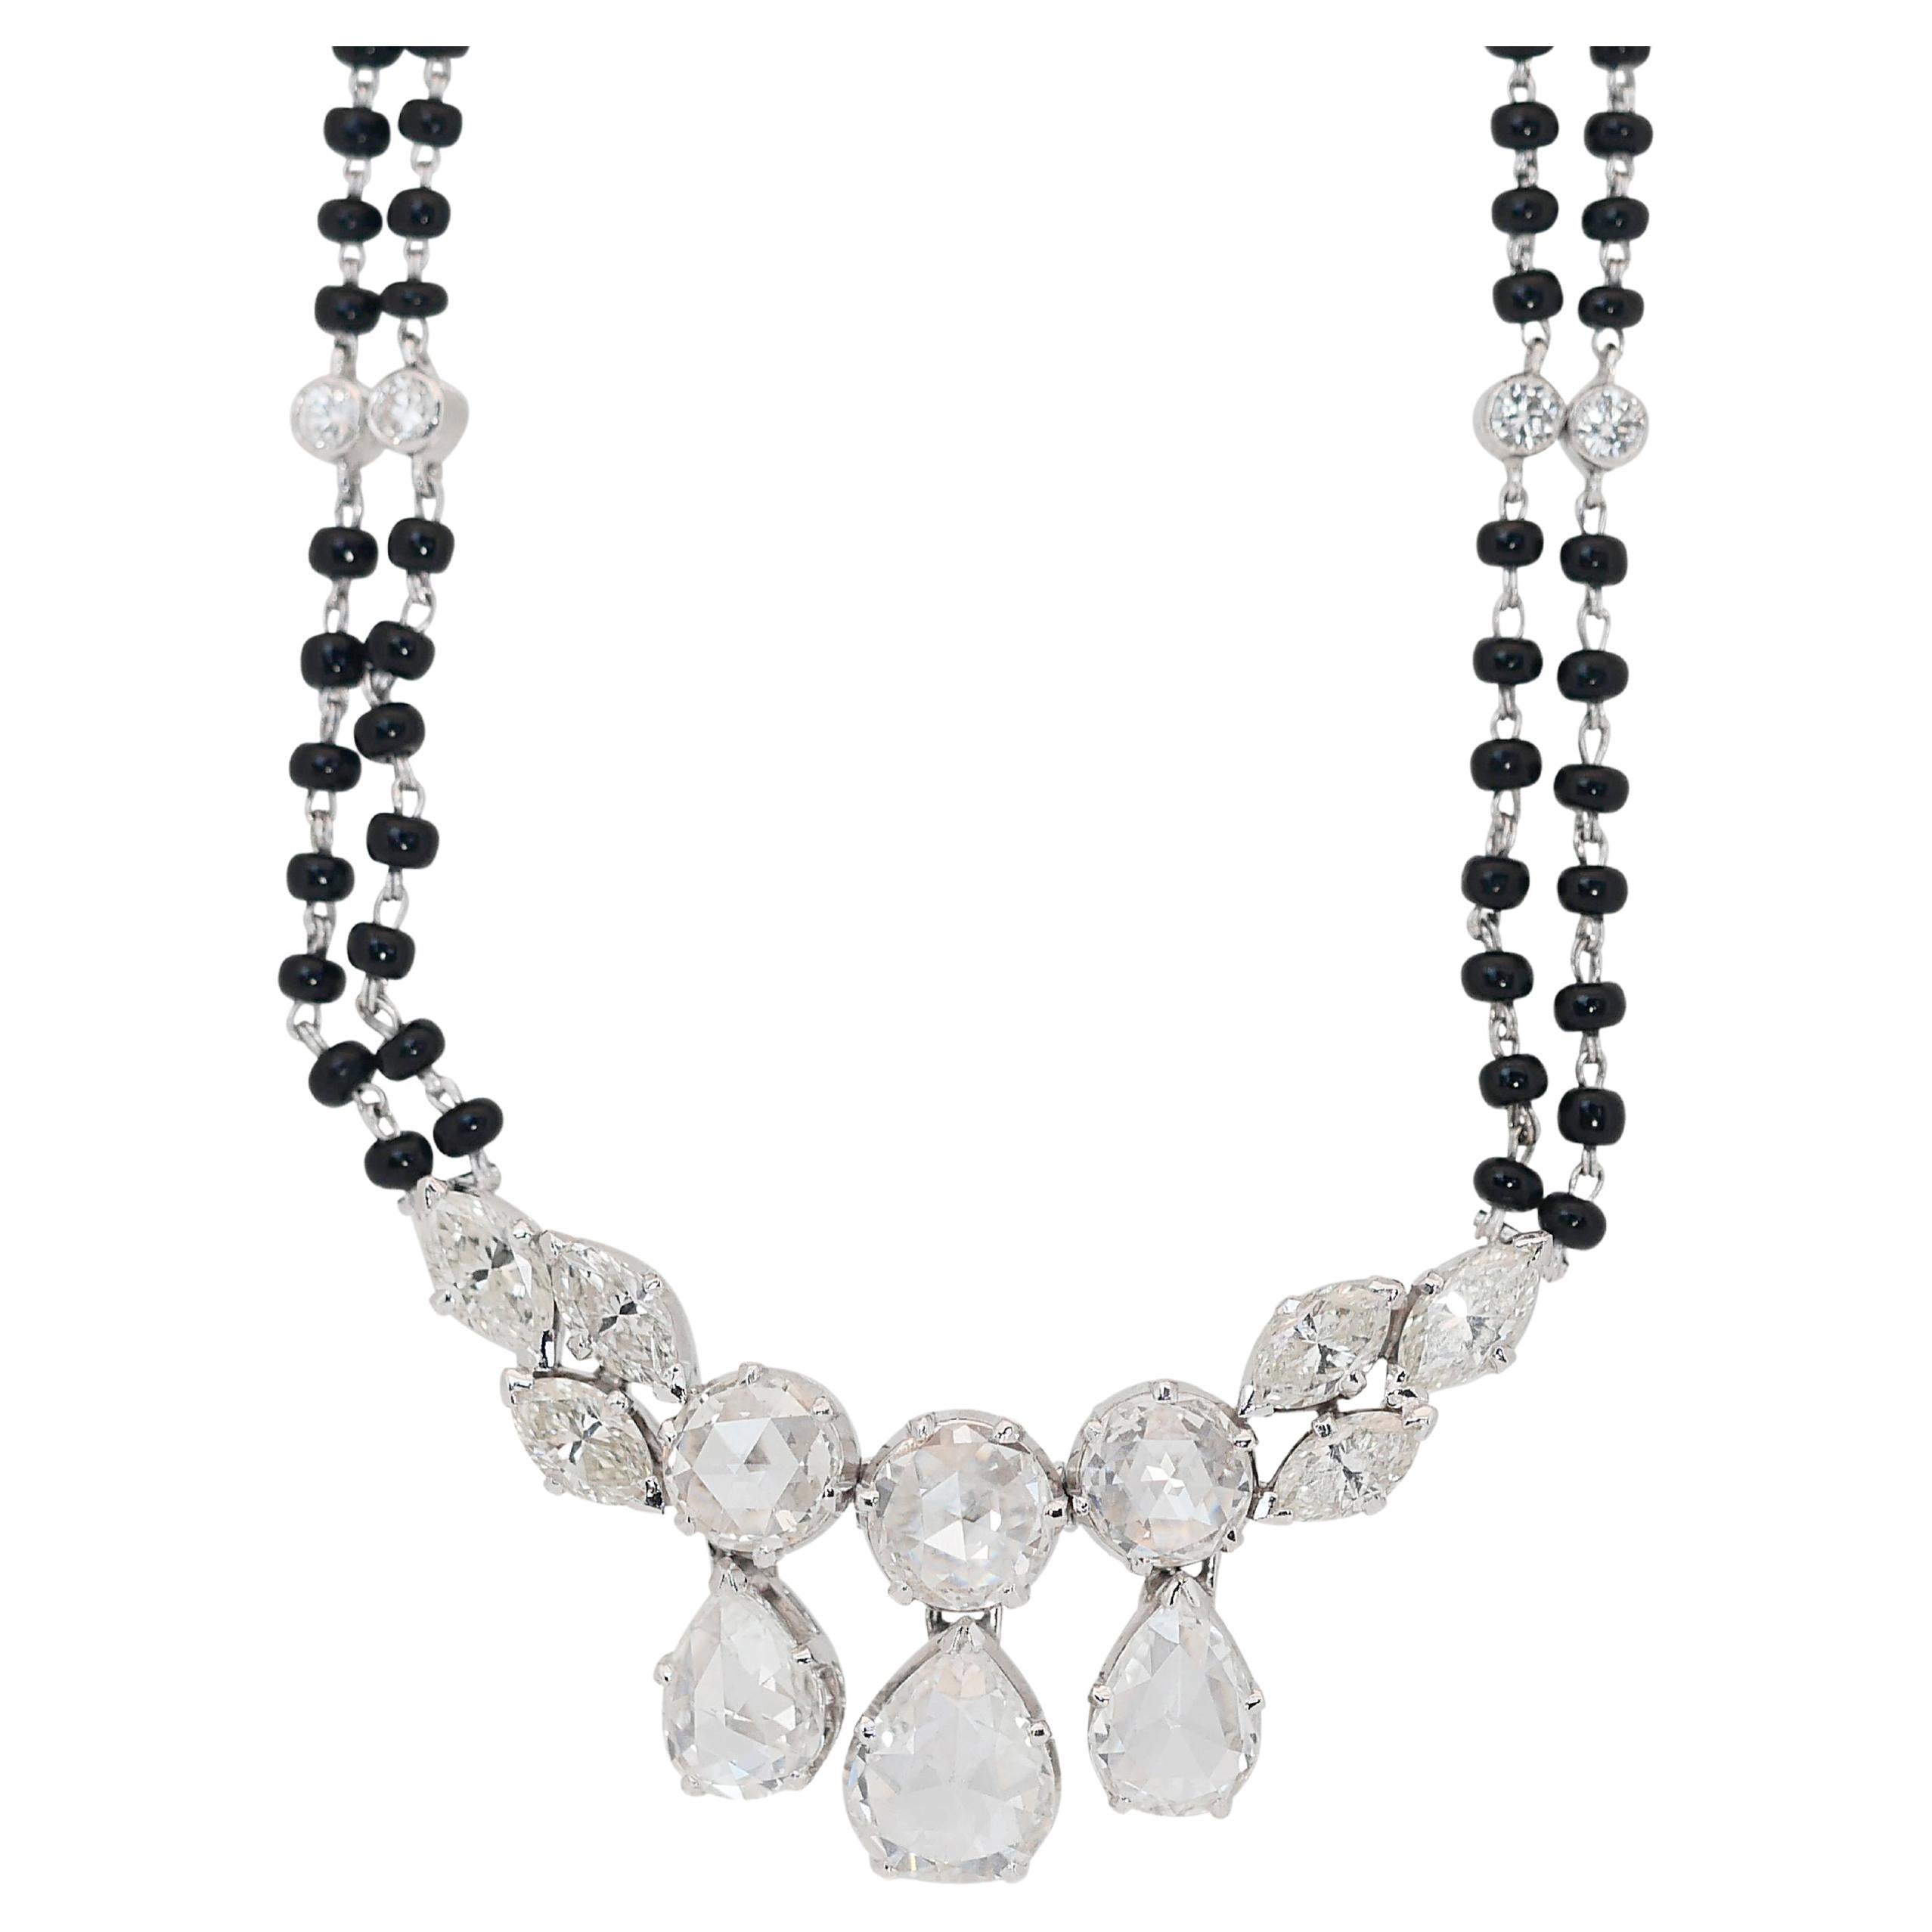 Glamorous 8.02 ct Onyx and Diamond Necklace in 18k White Gold - IGI Certified